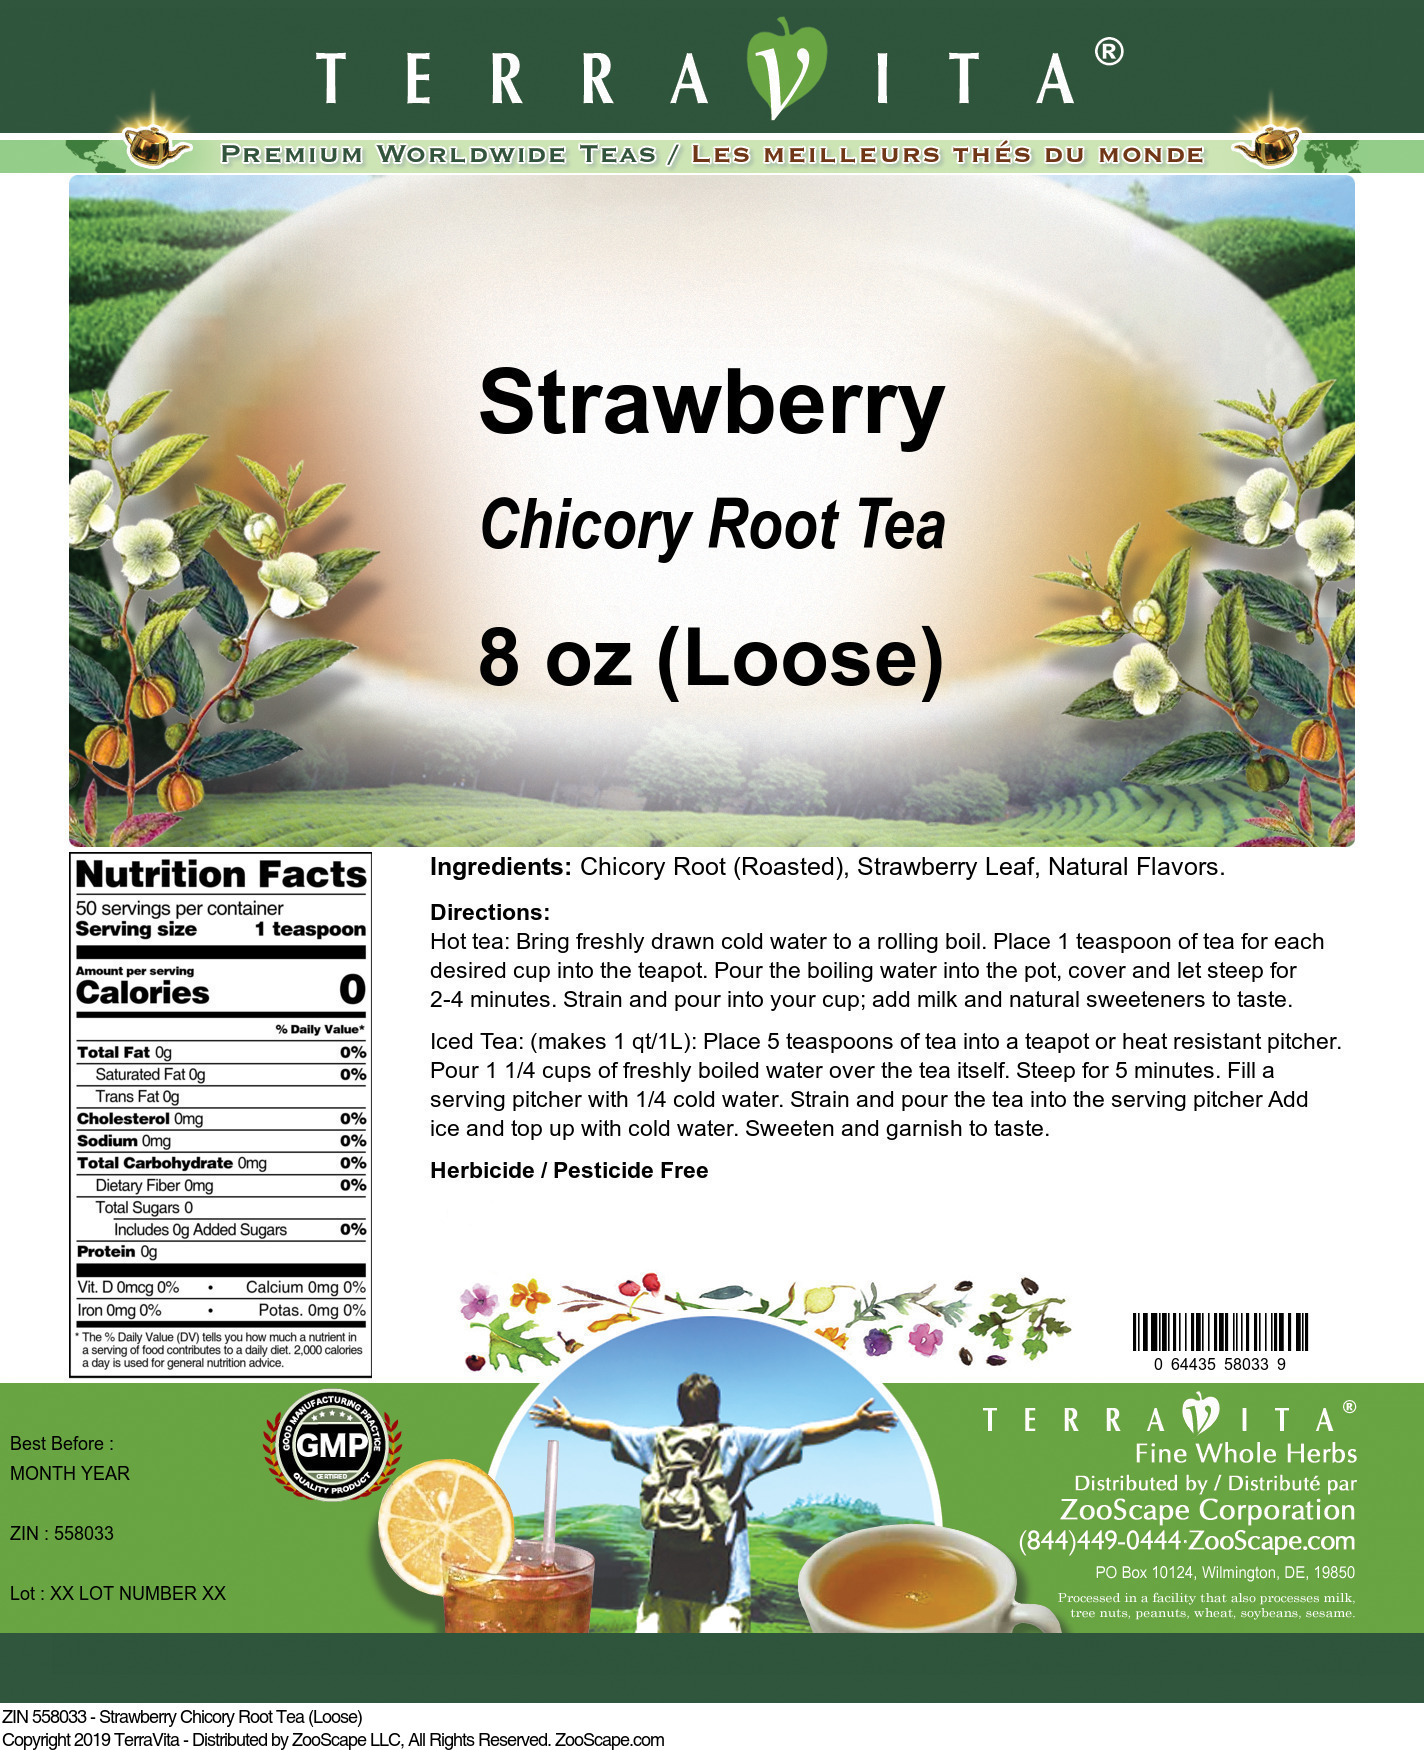 Strawberry Chicory Root Tea (Loose) - Label